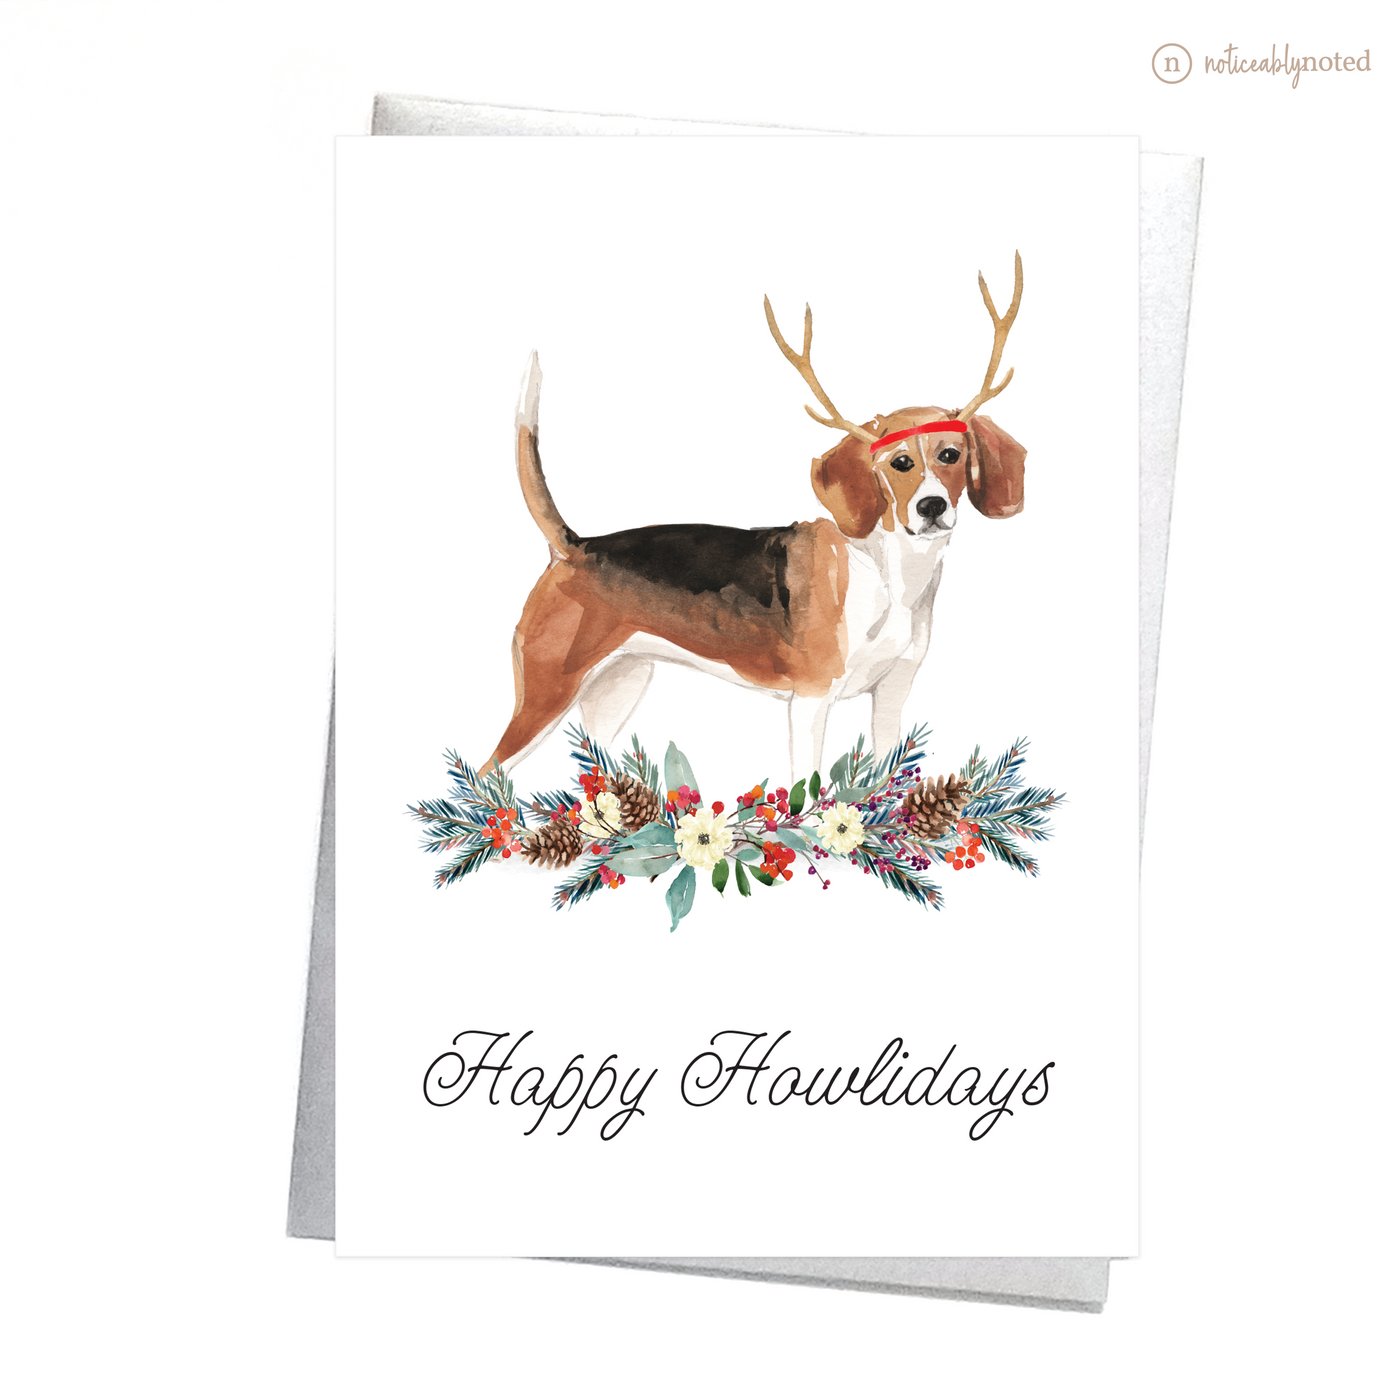 Beagle Dog Christmas Card | Noticeably Noted